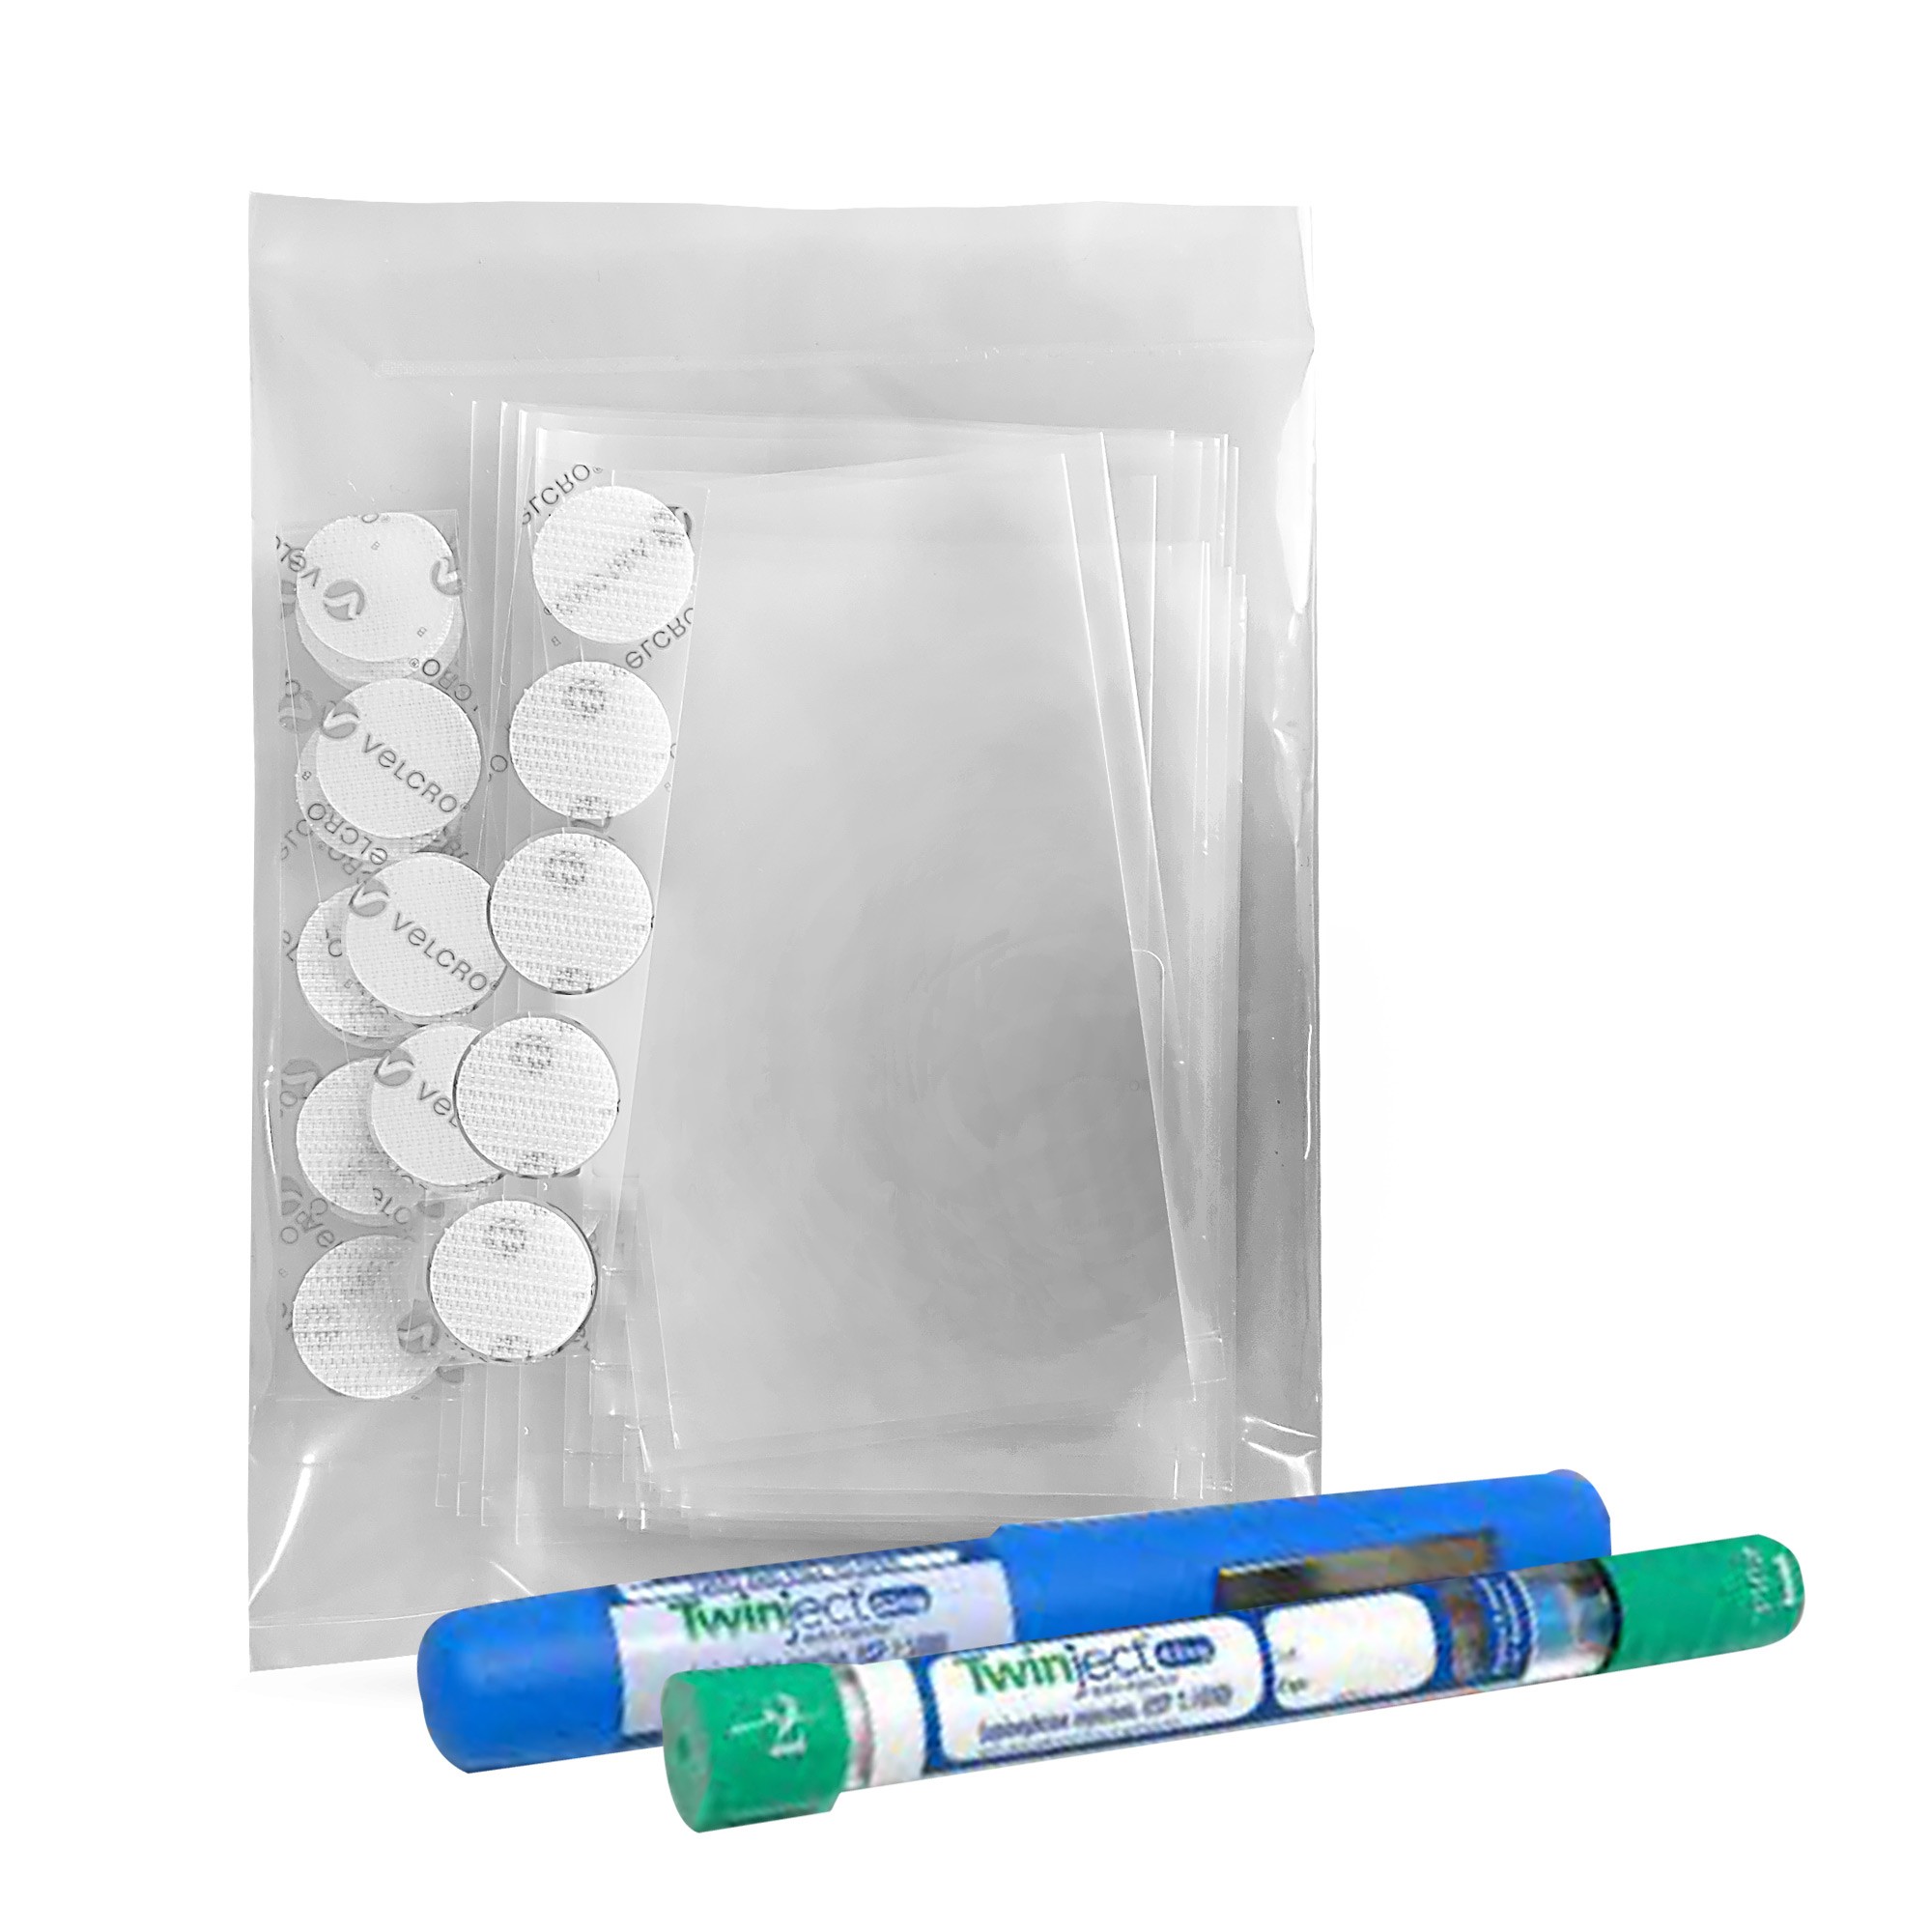  Photo label sleeve for TwinJect® auto-injector 15 pack)